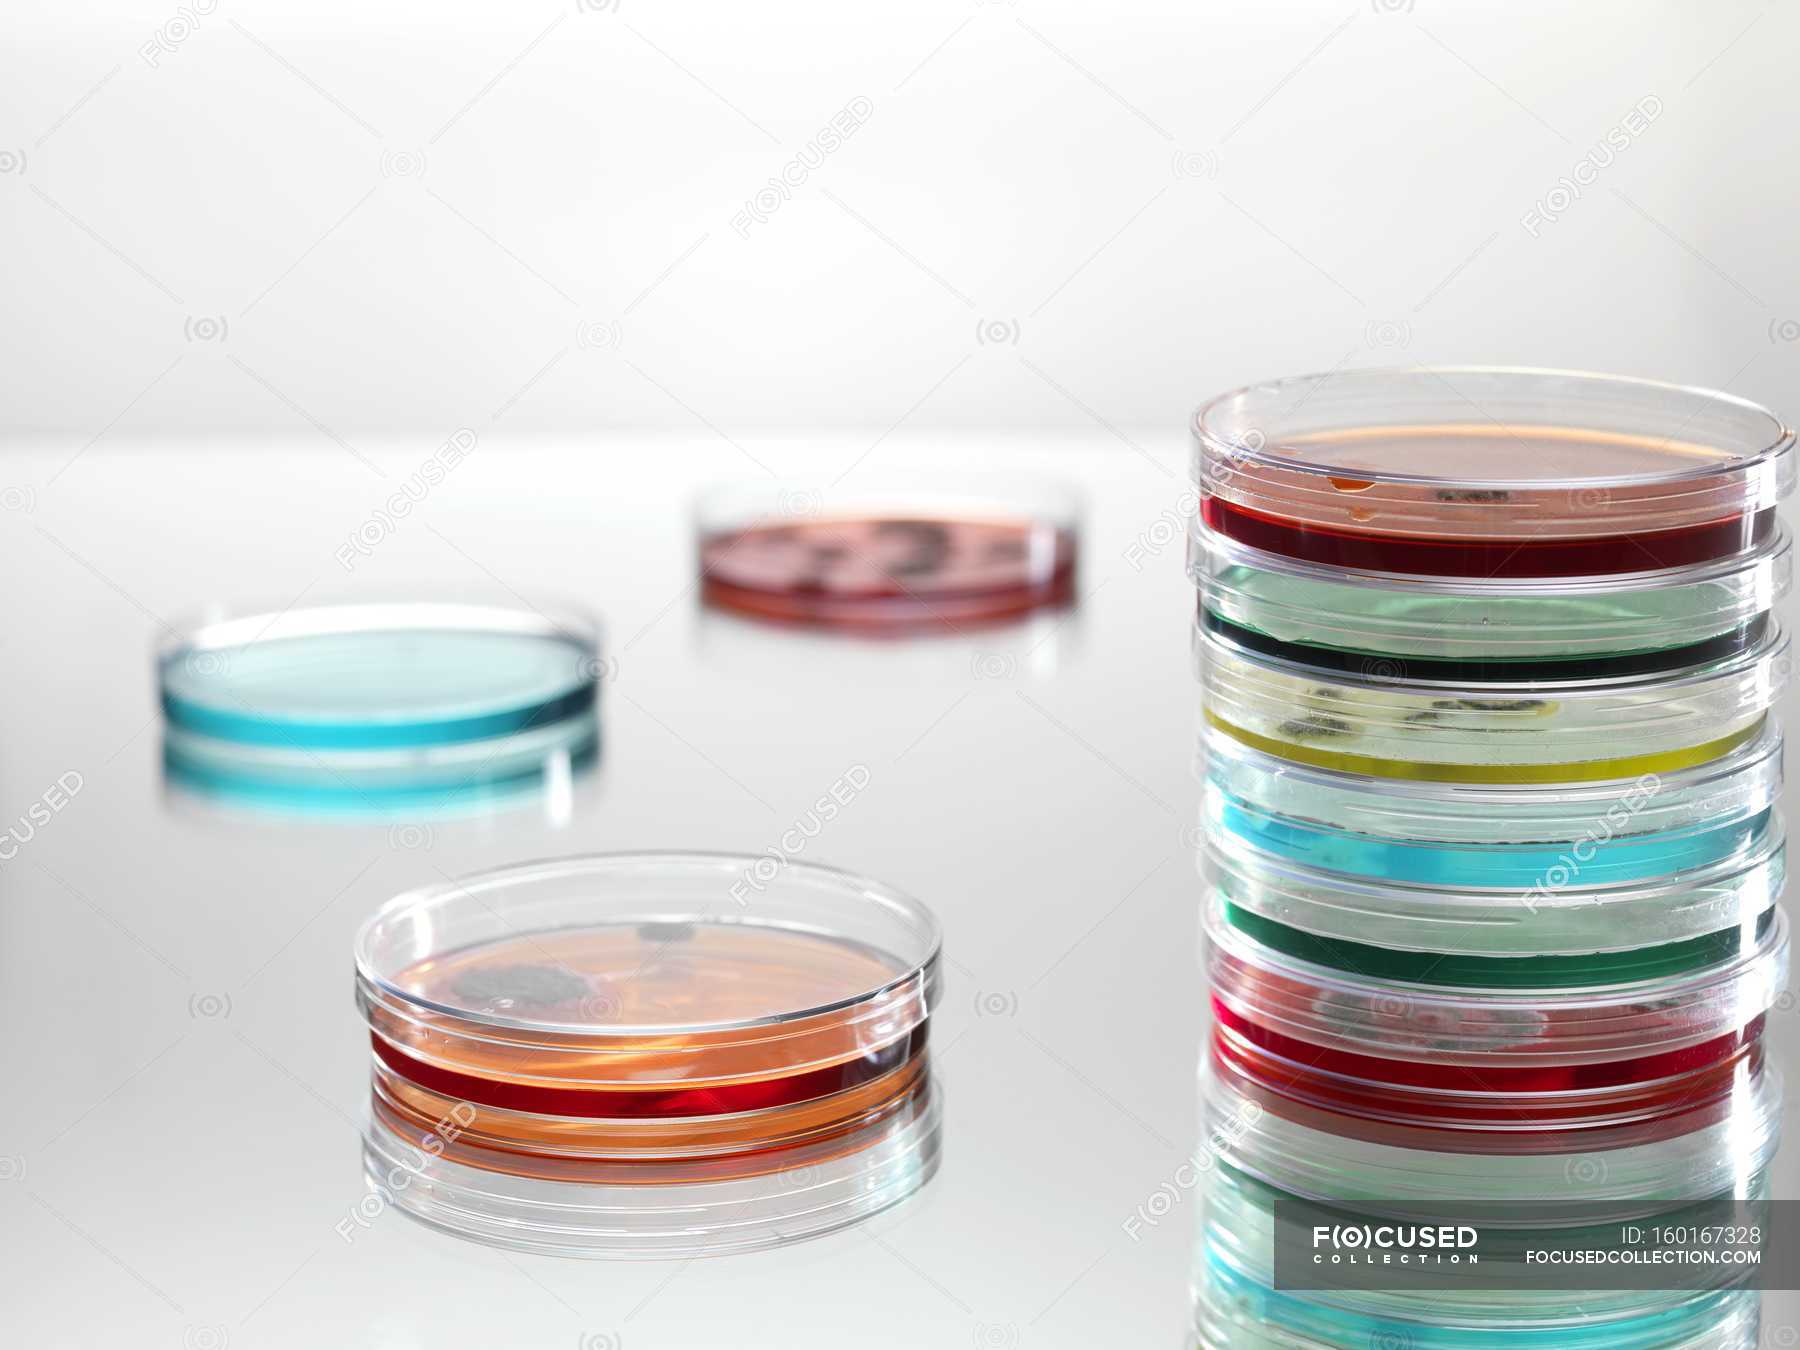 Petri dishes with colorful liquids for microbiology research. — science,  Studio Shot - Stock Photo | #160167328